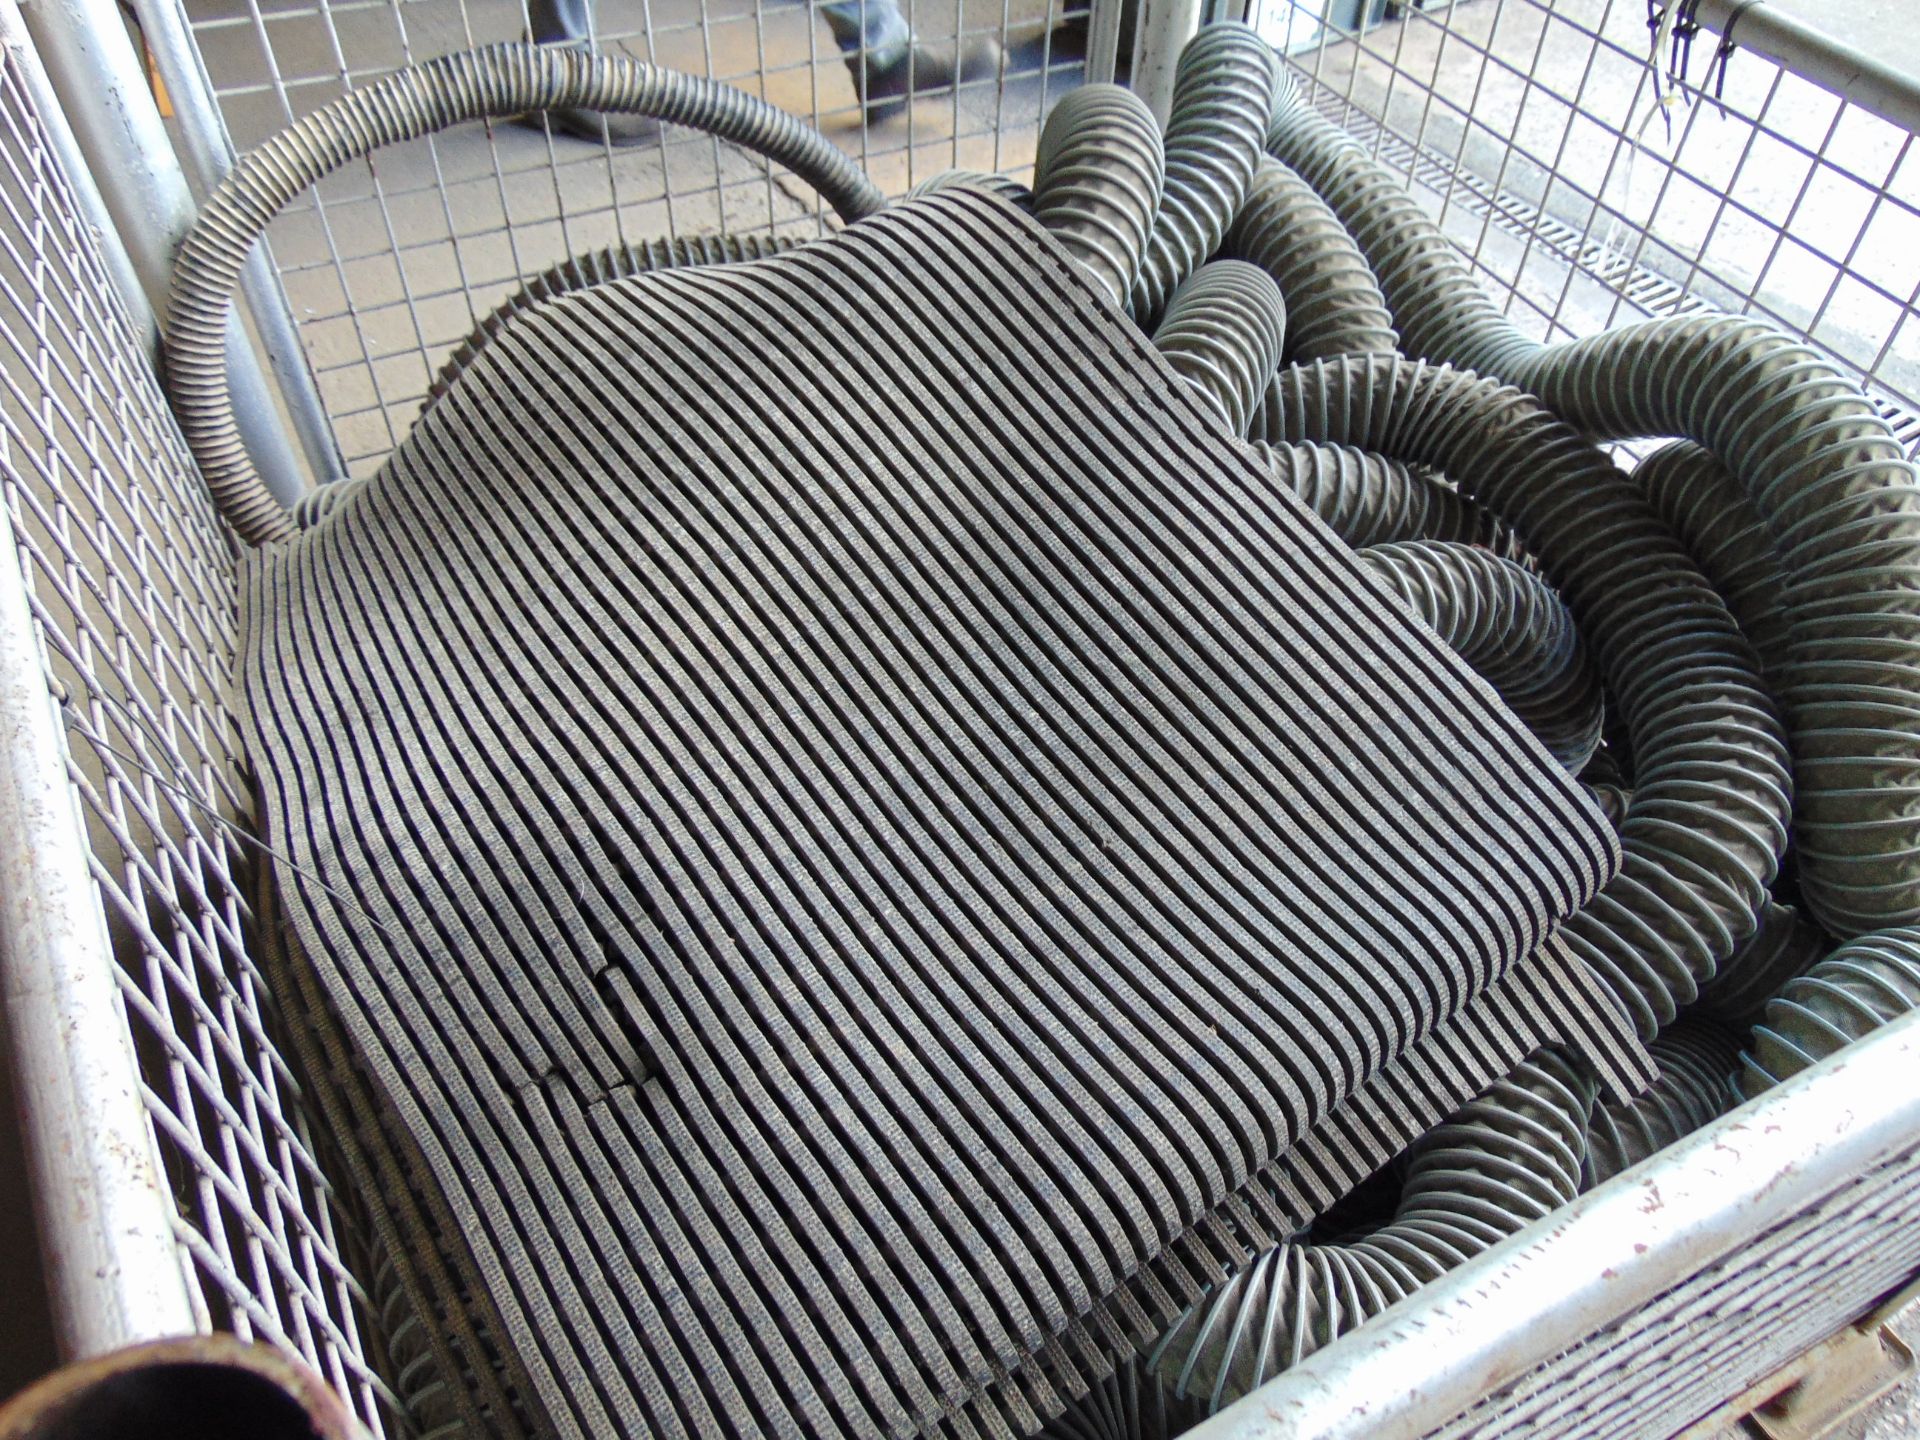 1 x Stillage of Flexible Hoses and Vehicle Floor Mats - Image 3 of 5